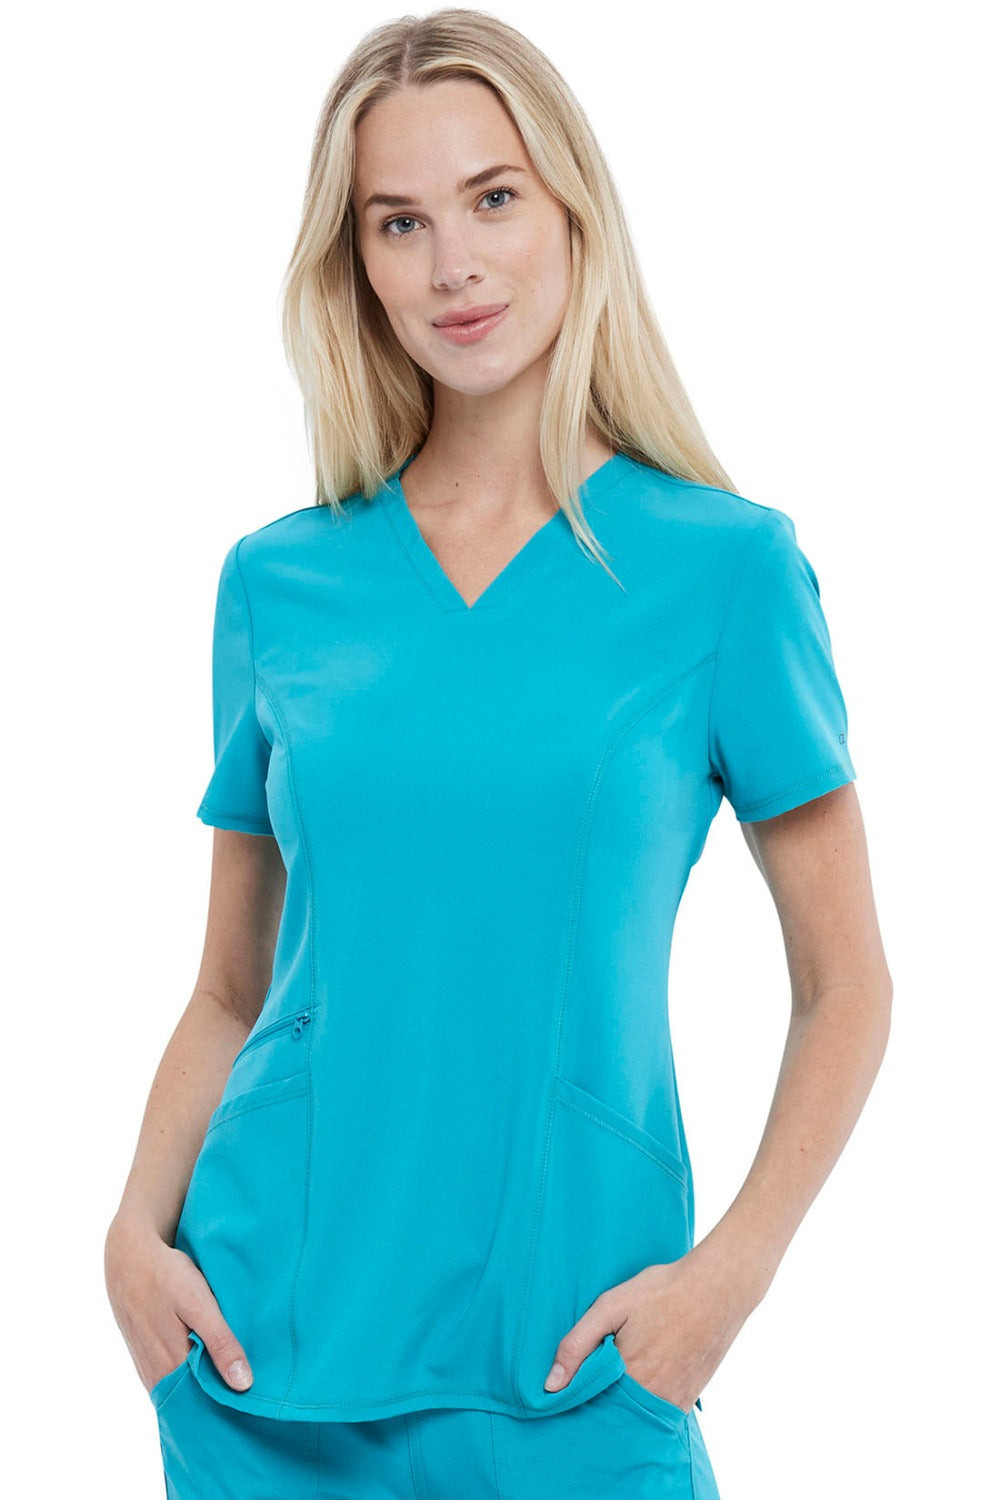 Cherokee Allura V-Neck Scrub Top in Teal Blue at Parker's Clothing and Shoes.